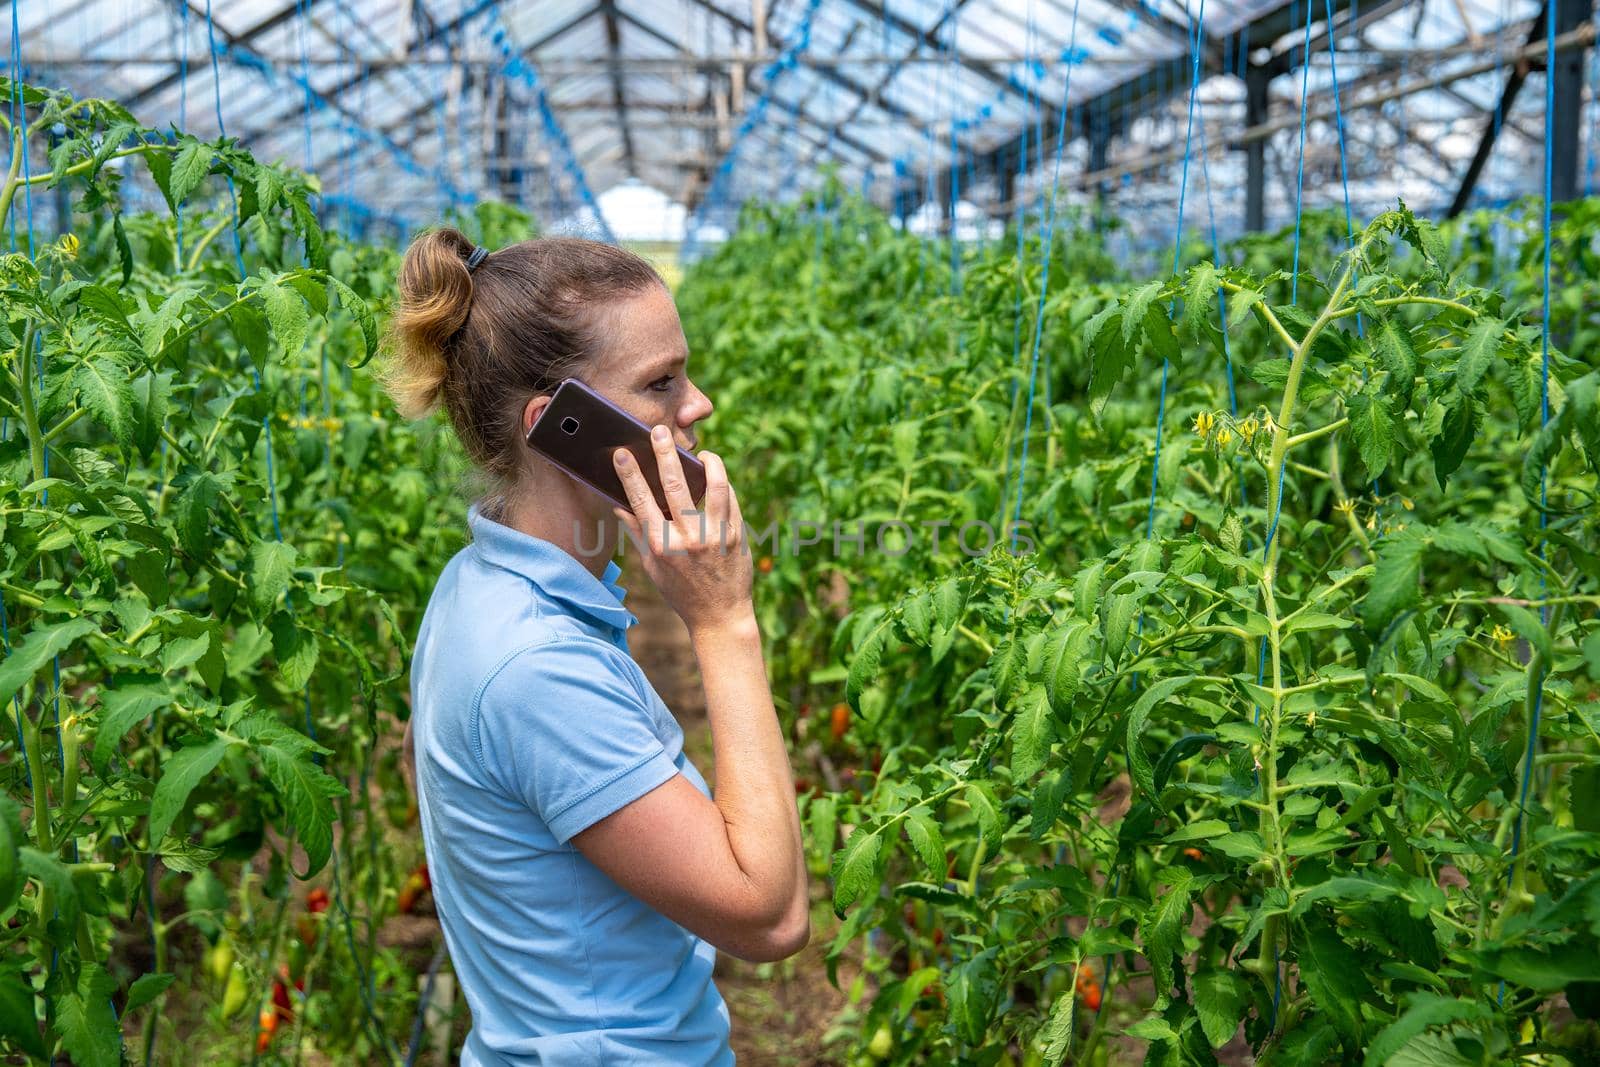 farmer phoning in a greenhouse on an organic farm growing tomatoes by Edophoto